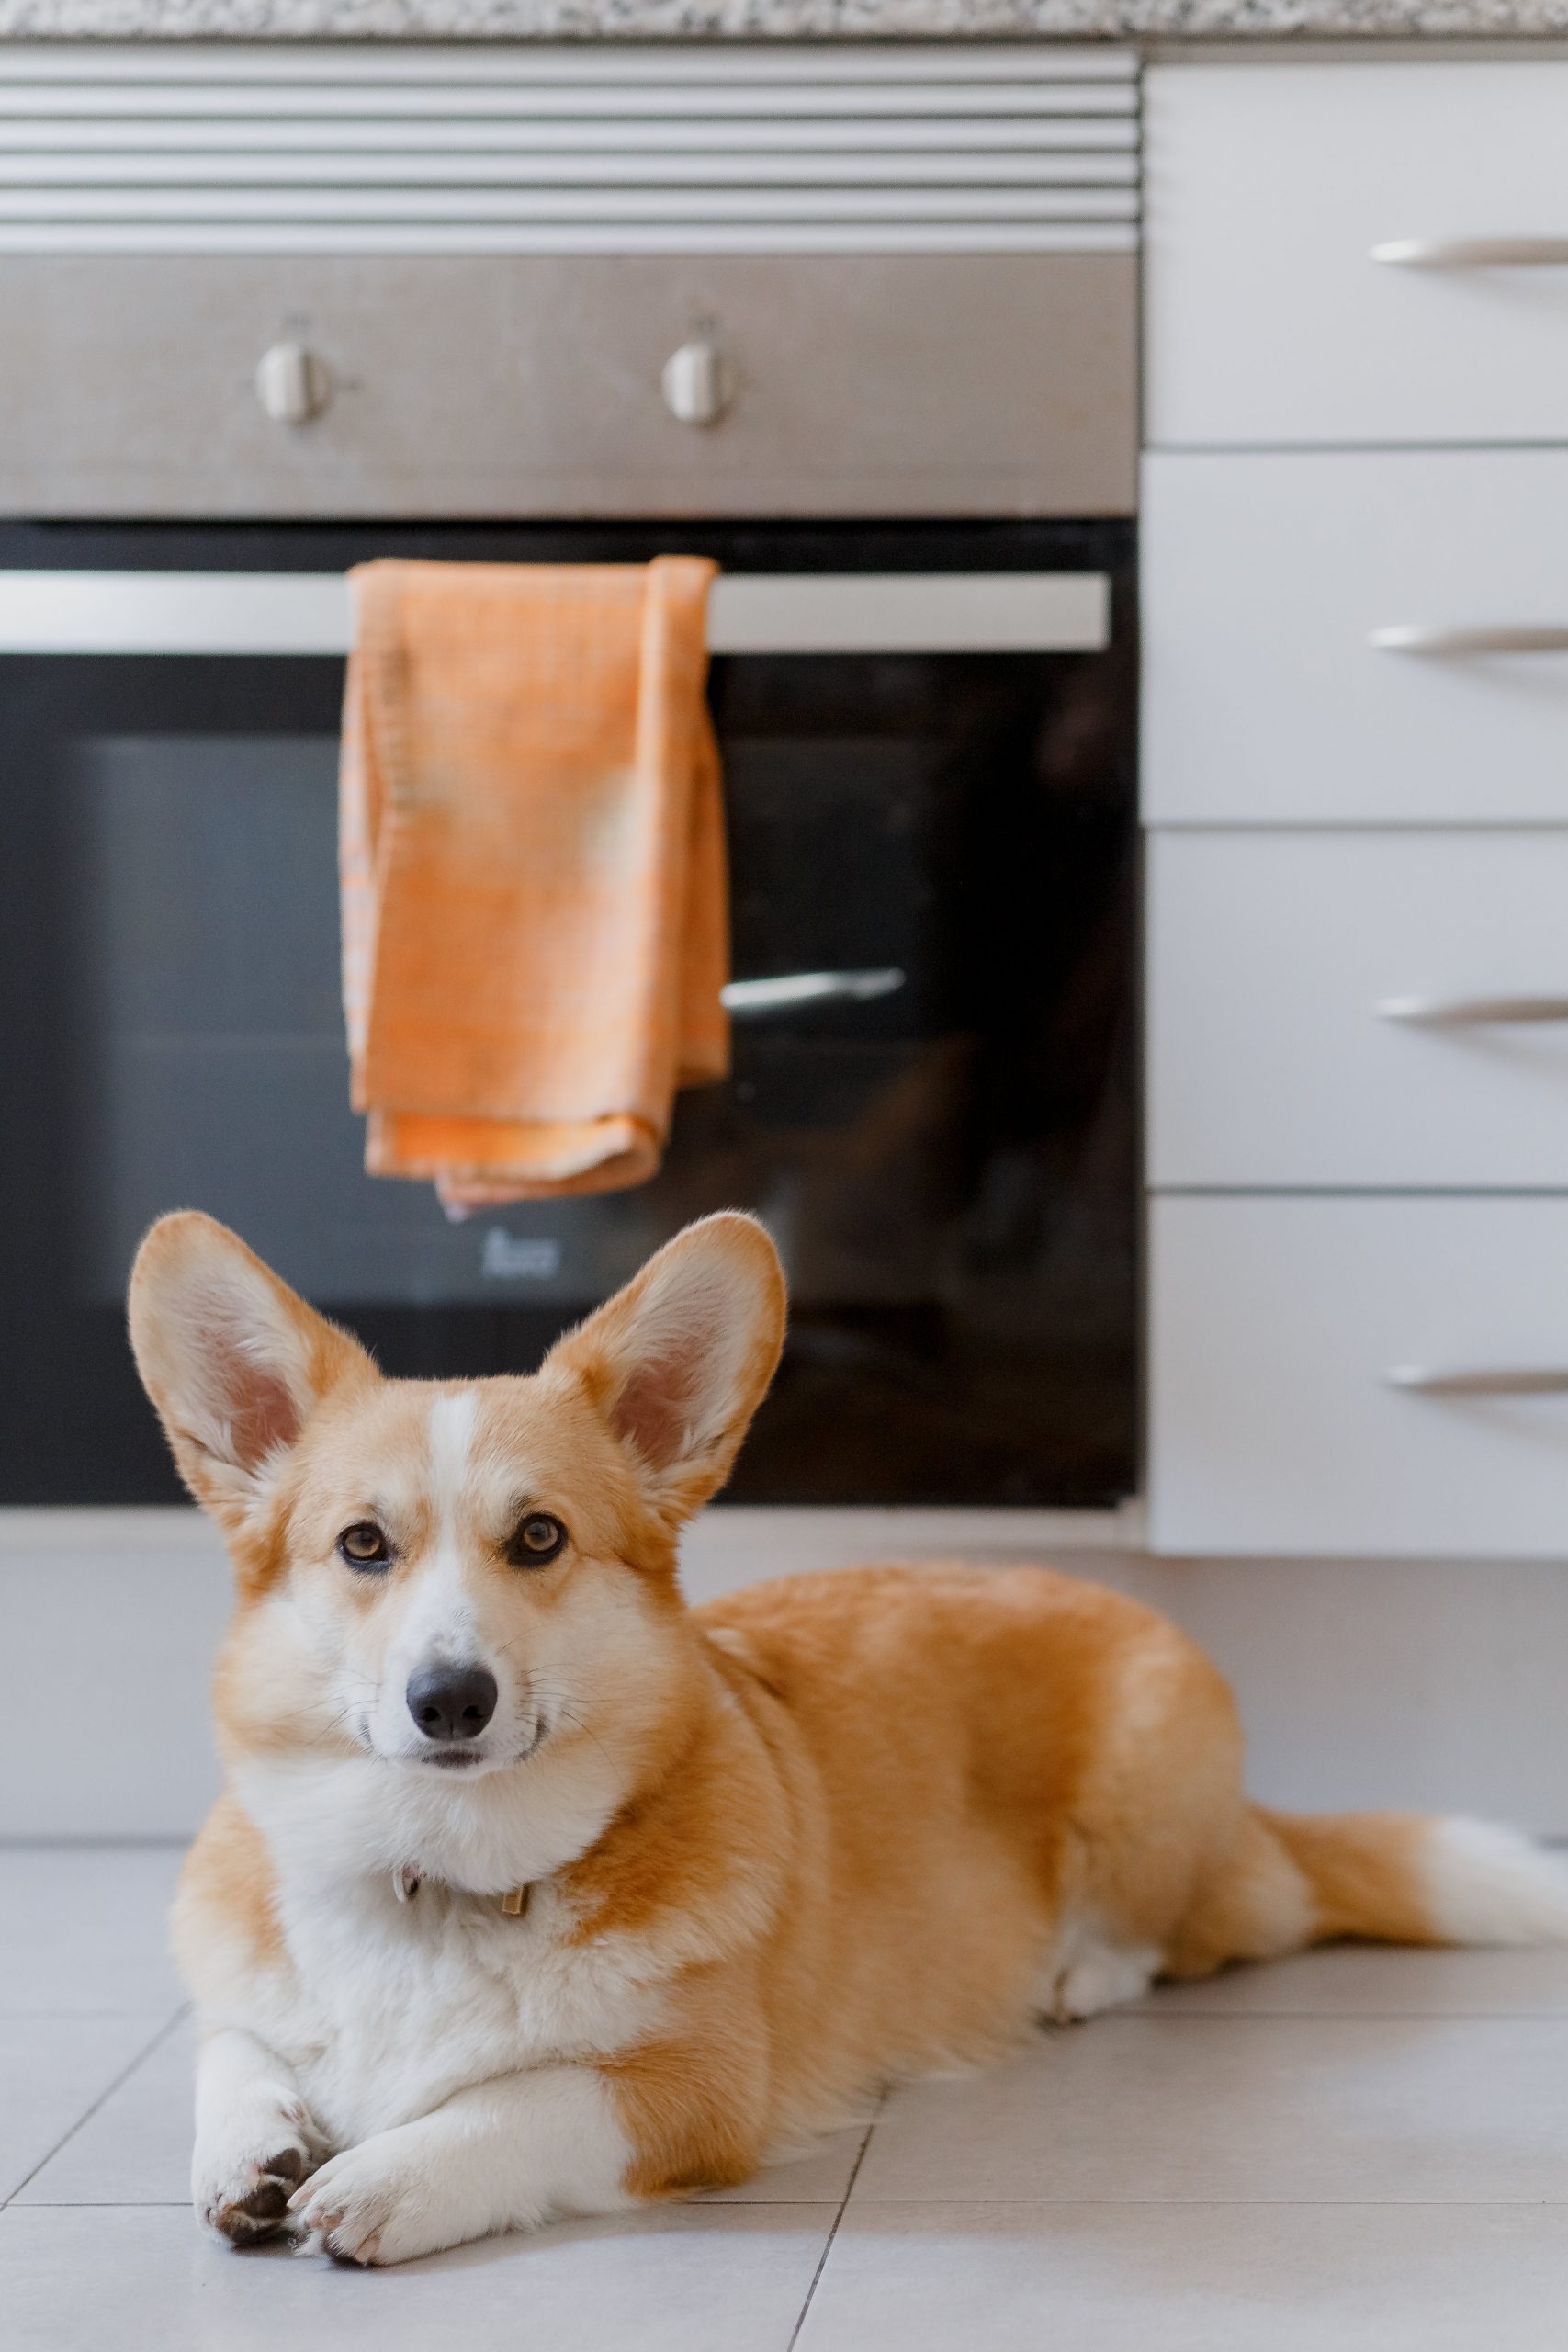 Monthly Cost to Own a Corgi